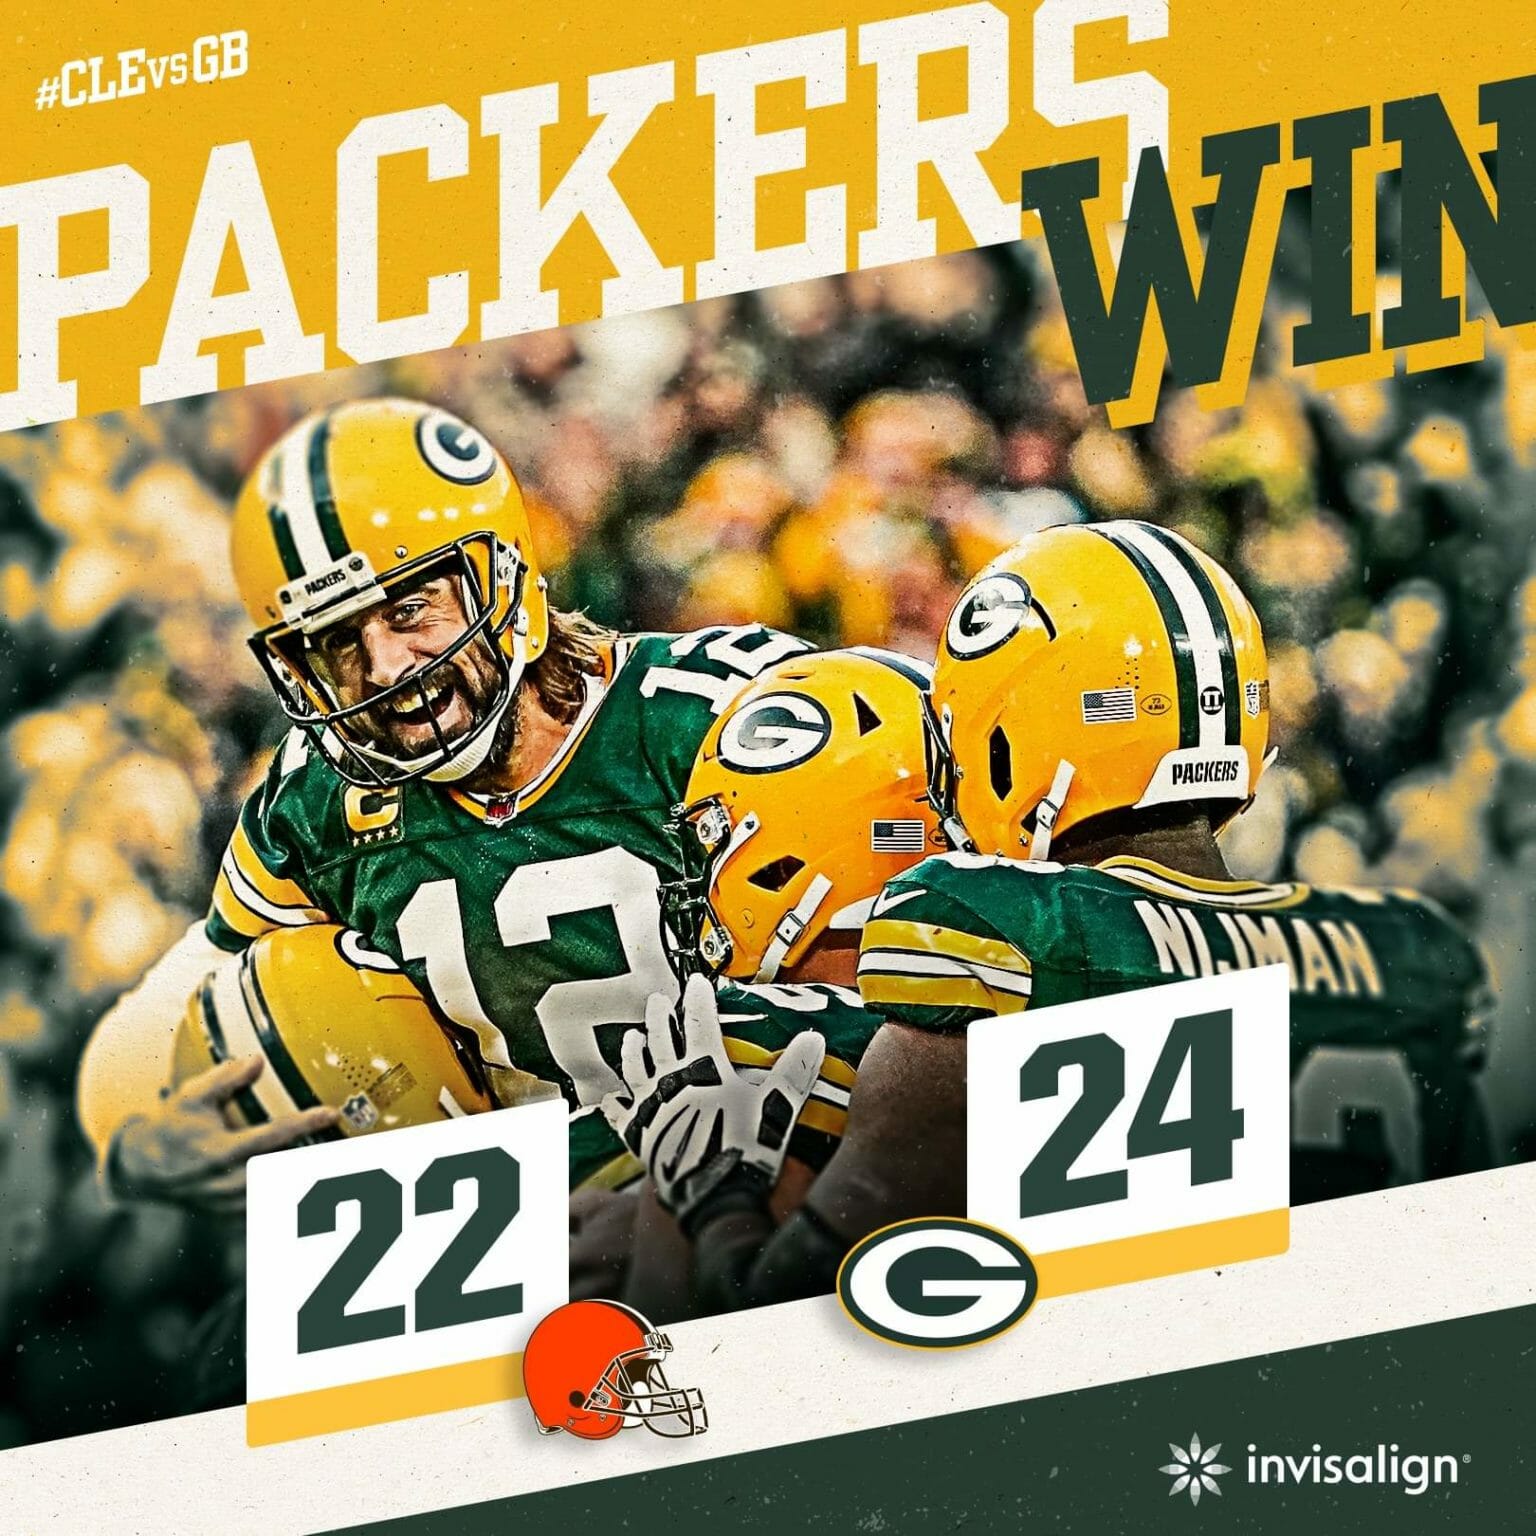 Packers Win Vs. Browns